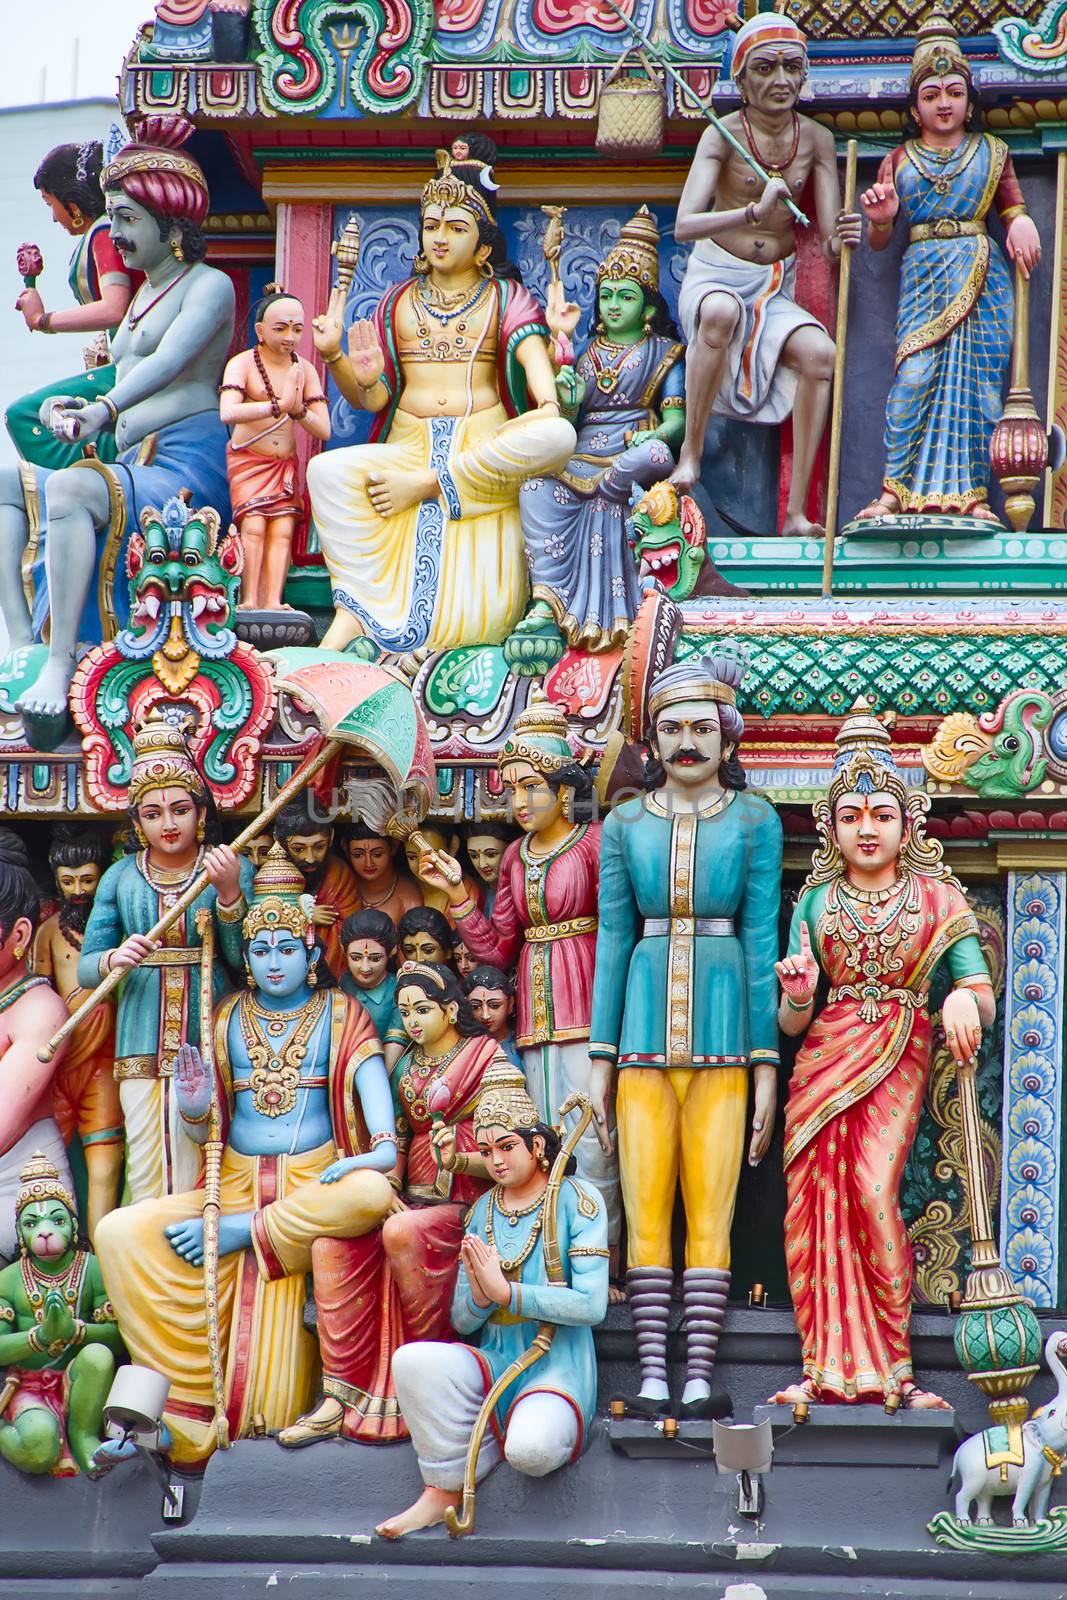 Fragment of decorations of the Hindu temple Sri Mariamman in Singapore